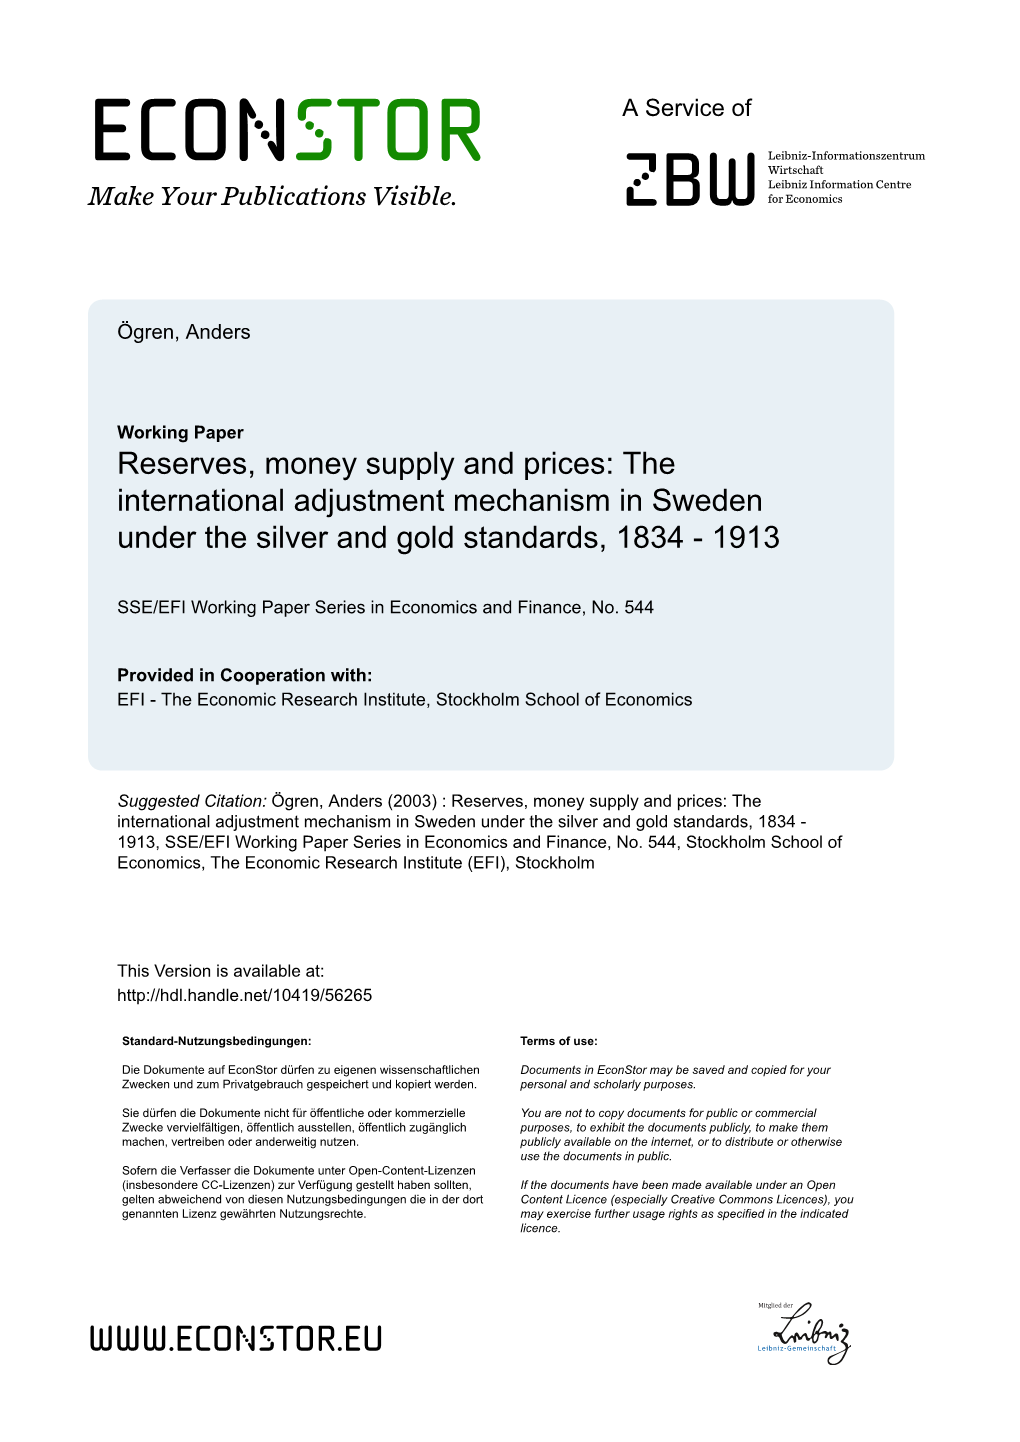 Reserves, Money Supply and Prices: the International Adjustment Mechanism in Sweden Under the Silver and Gold Standards, 1834 - 1913